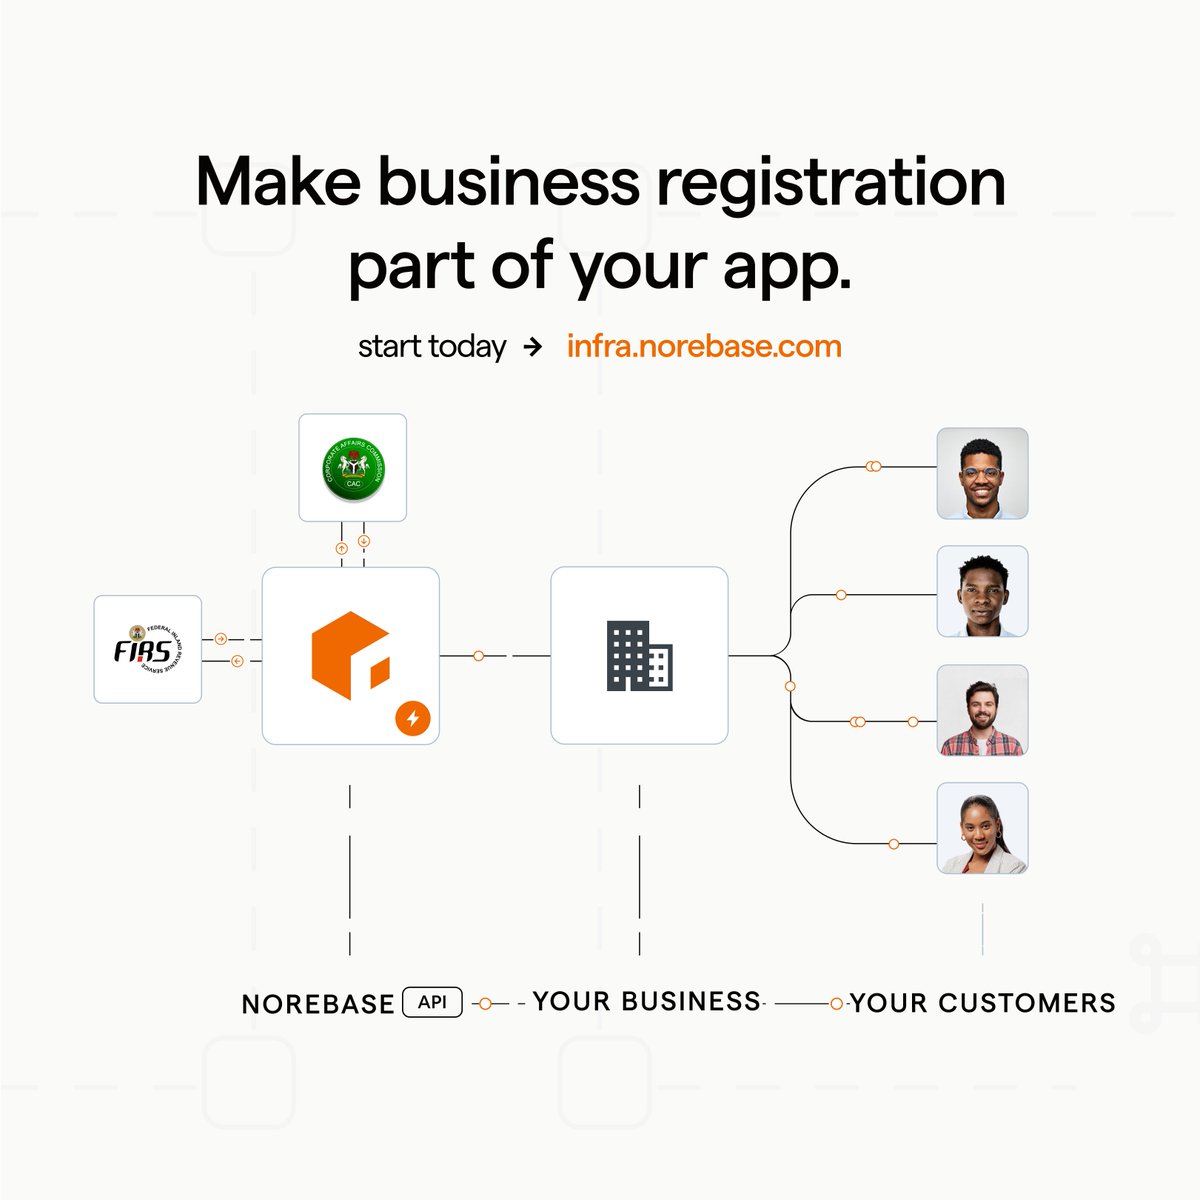 This is the best time to get the Norebase API that lets your customers register their businesses with CAC without ever leaving your app/website.

Tag all the FinTech and Banks providing POSes that you know, Norebase is the solution they need